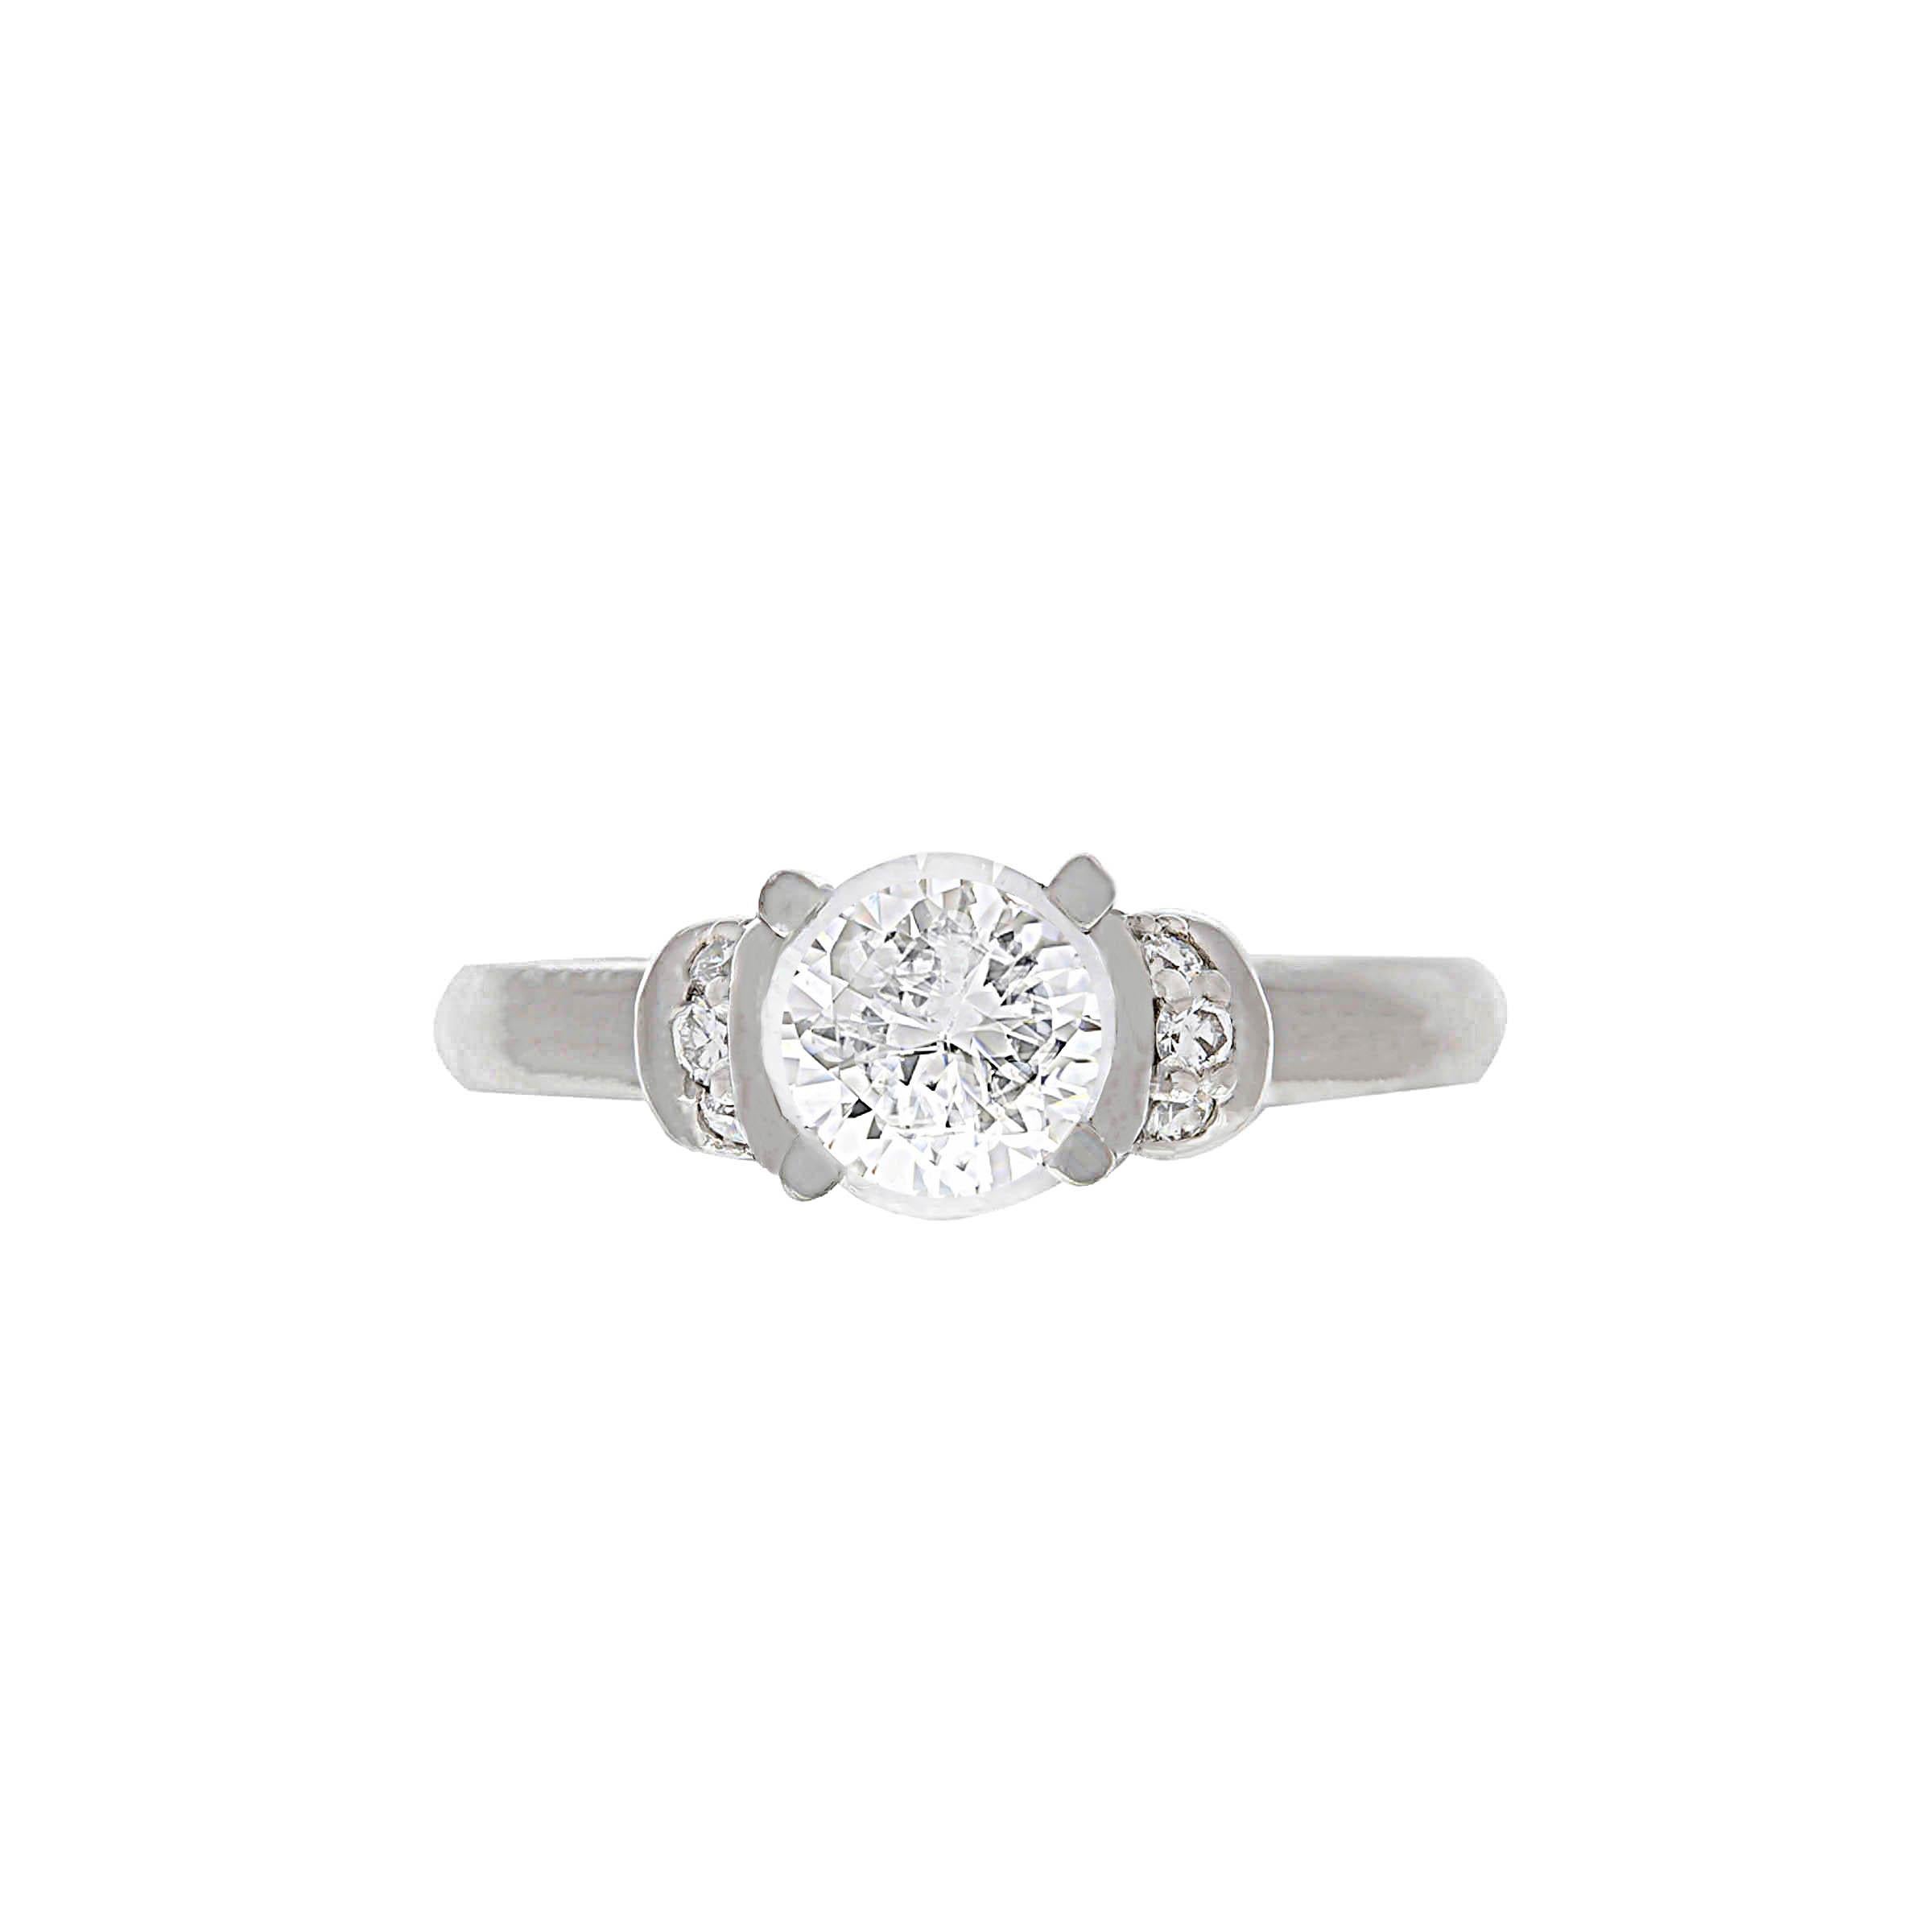 Scott Kay platinum engagement ring containing one GIA certified round brilliant cut diamond weighing 1.05 carats, G color, VS2 clarity. The mounting contains 0.16 carat of diamonds, G color, VS clarity.
This ring can be sized.